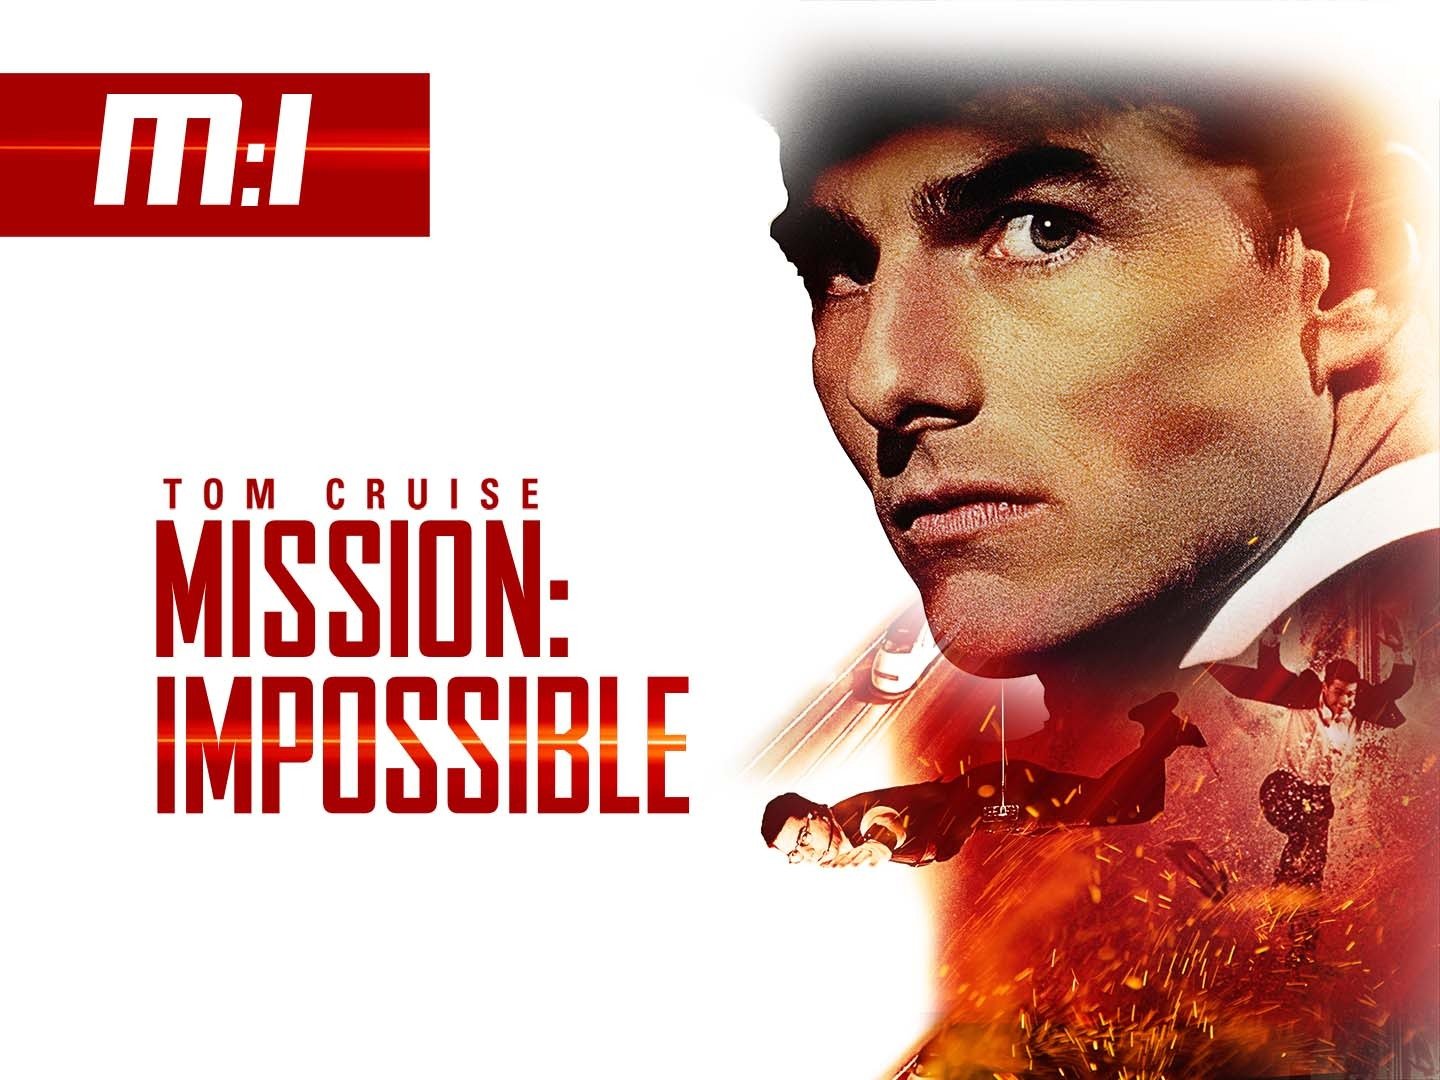 Mission Impossible Trailer 1 Trailers & Videos Rotten Tomatoes